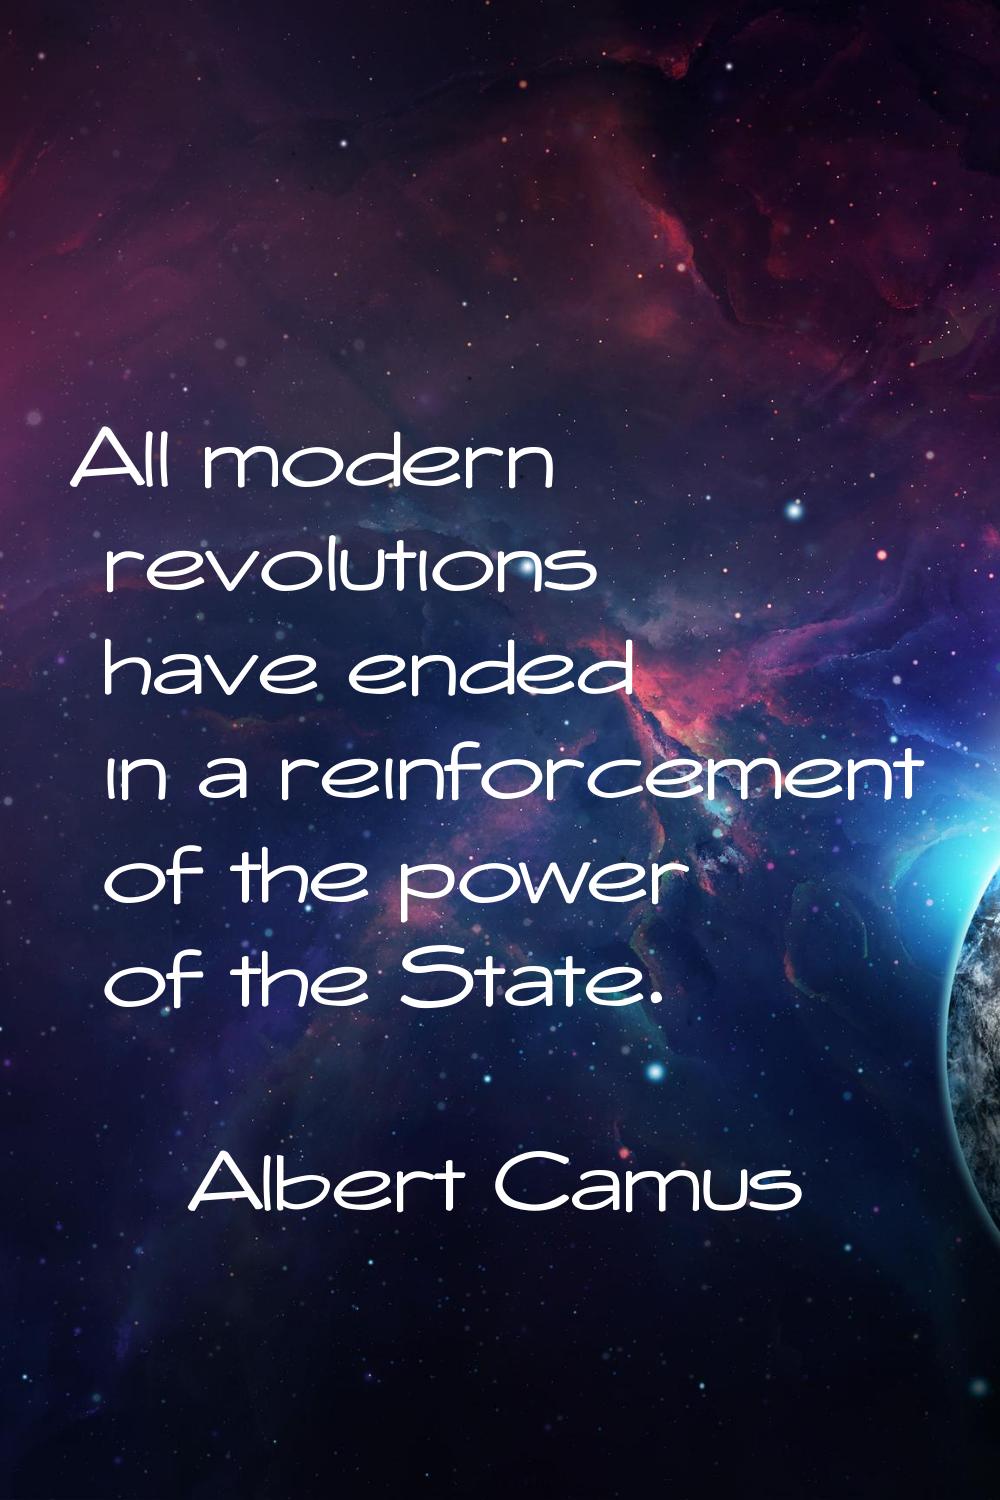 All modern revolutions have ended in a reinforcement of the power of the State.